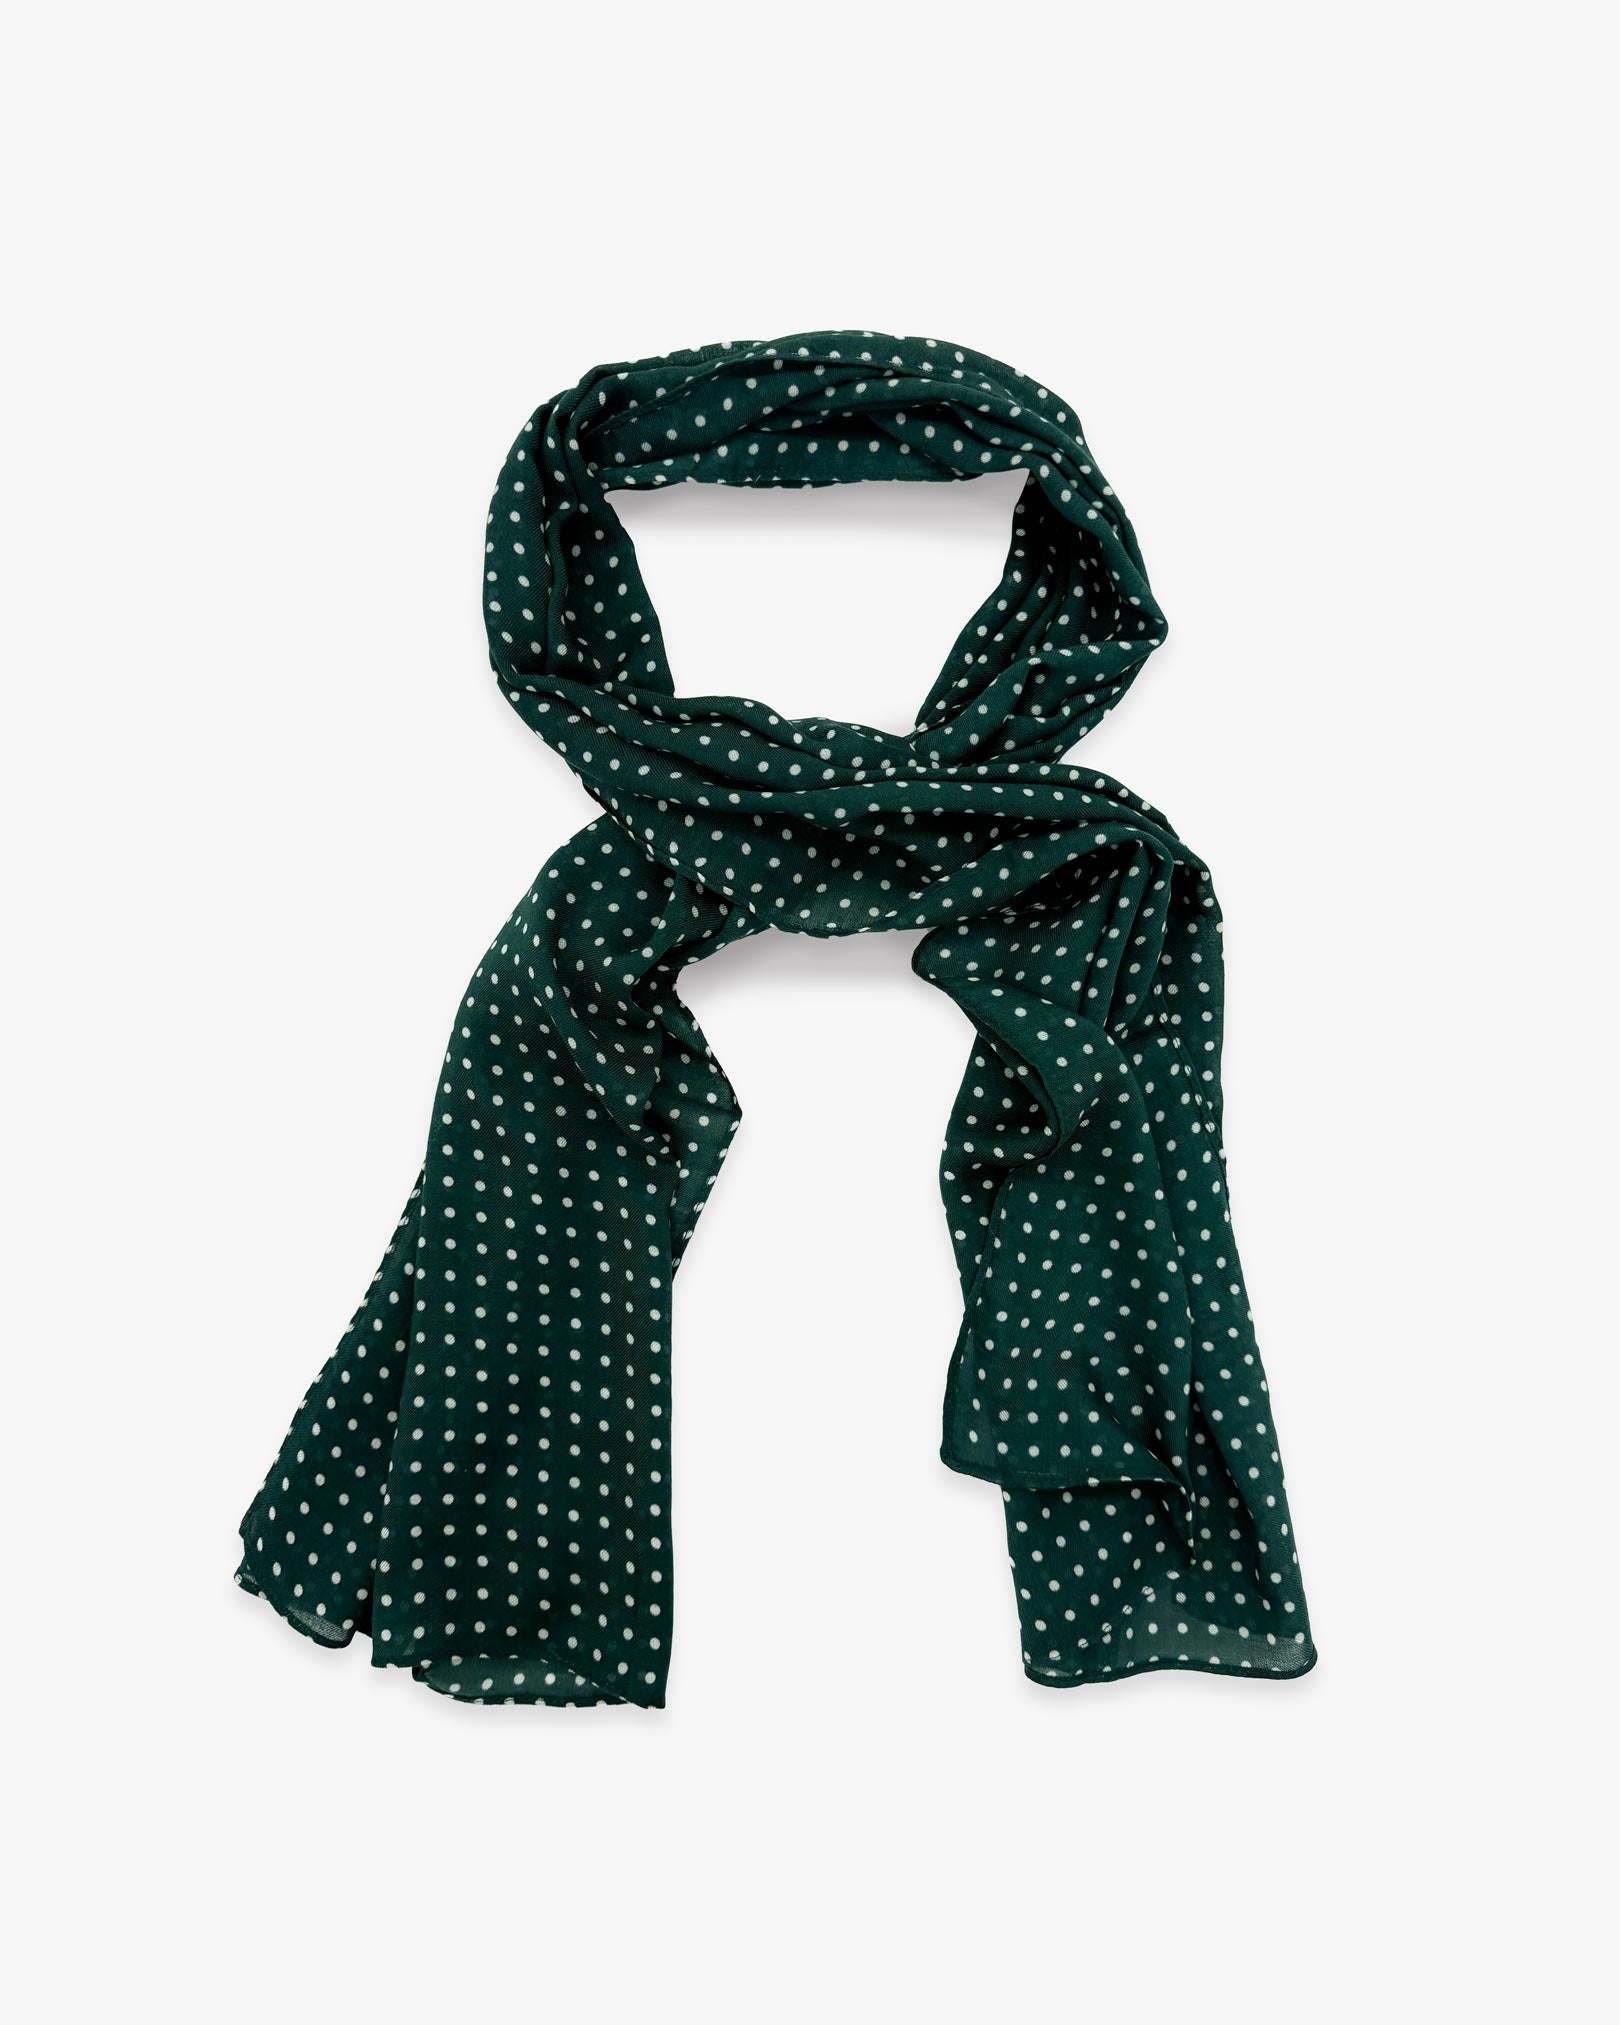 The Westminster Racing Green wide scarf unravelled and looped in the middle, demonstrating the longer scarf length and polka dot patterns.